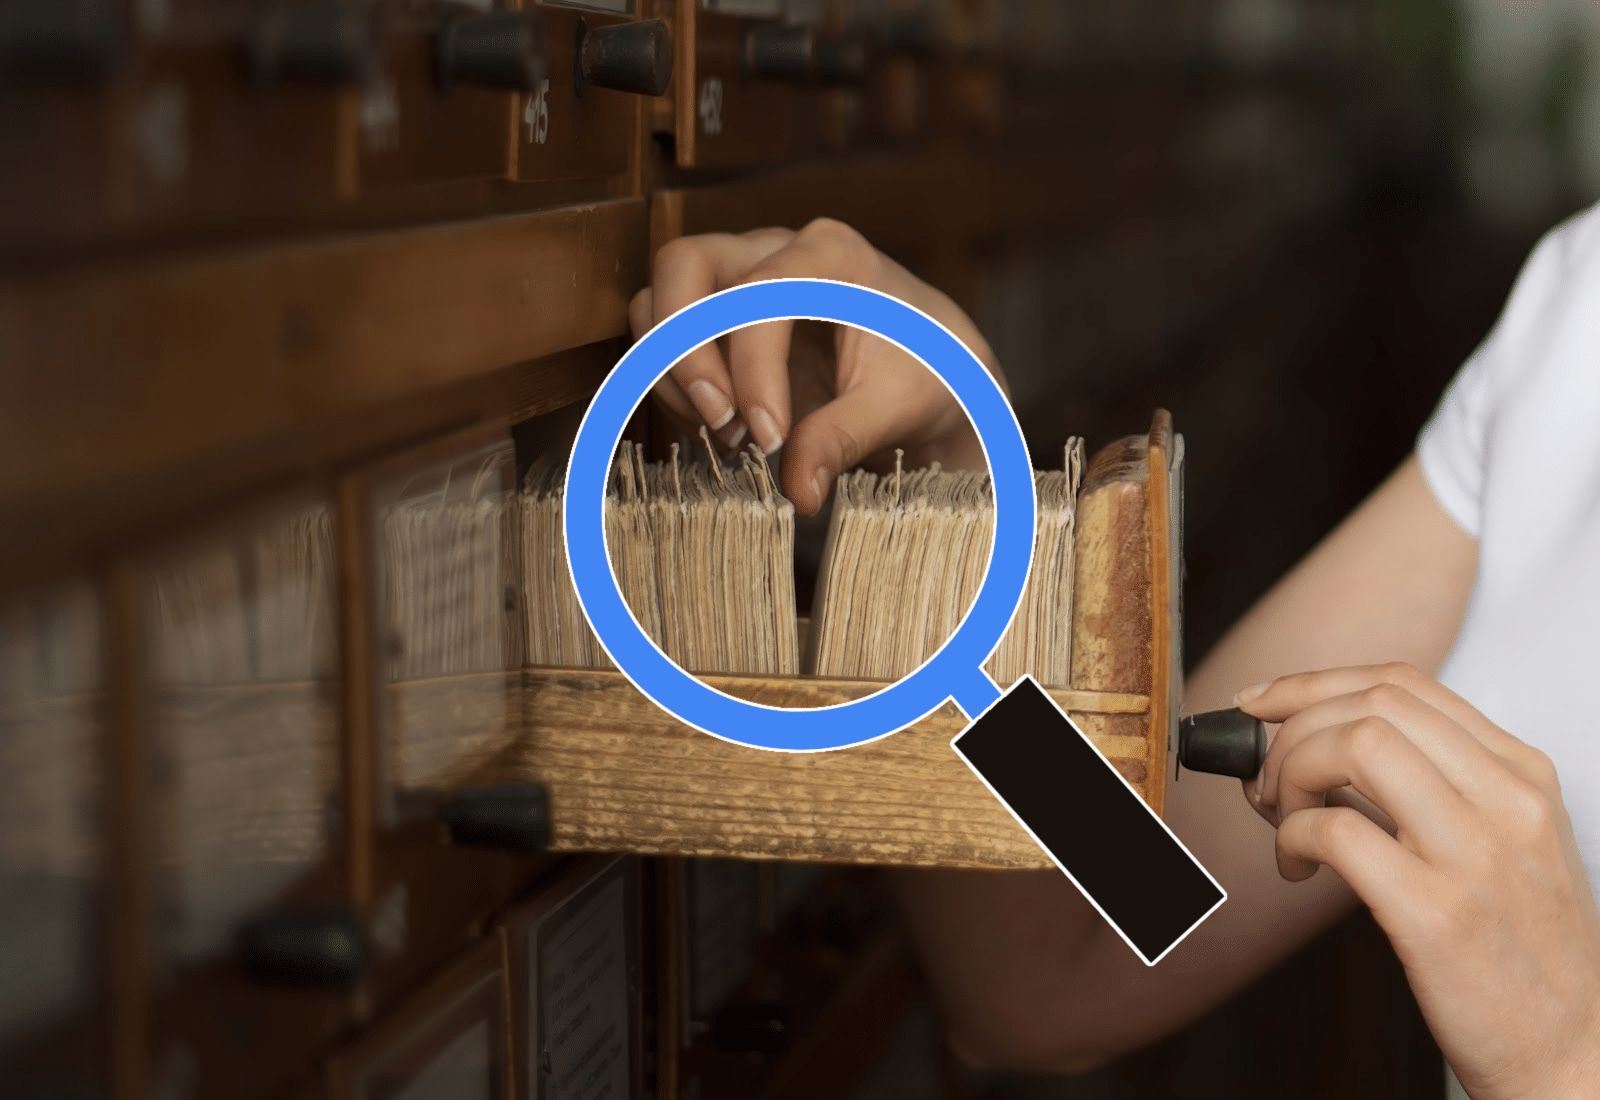 illustration of magnifying glass over image of woman looking through library card catalog